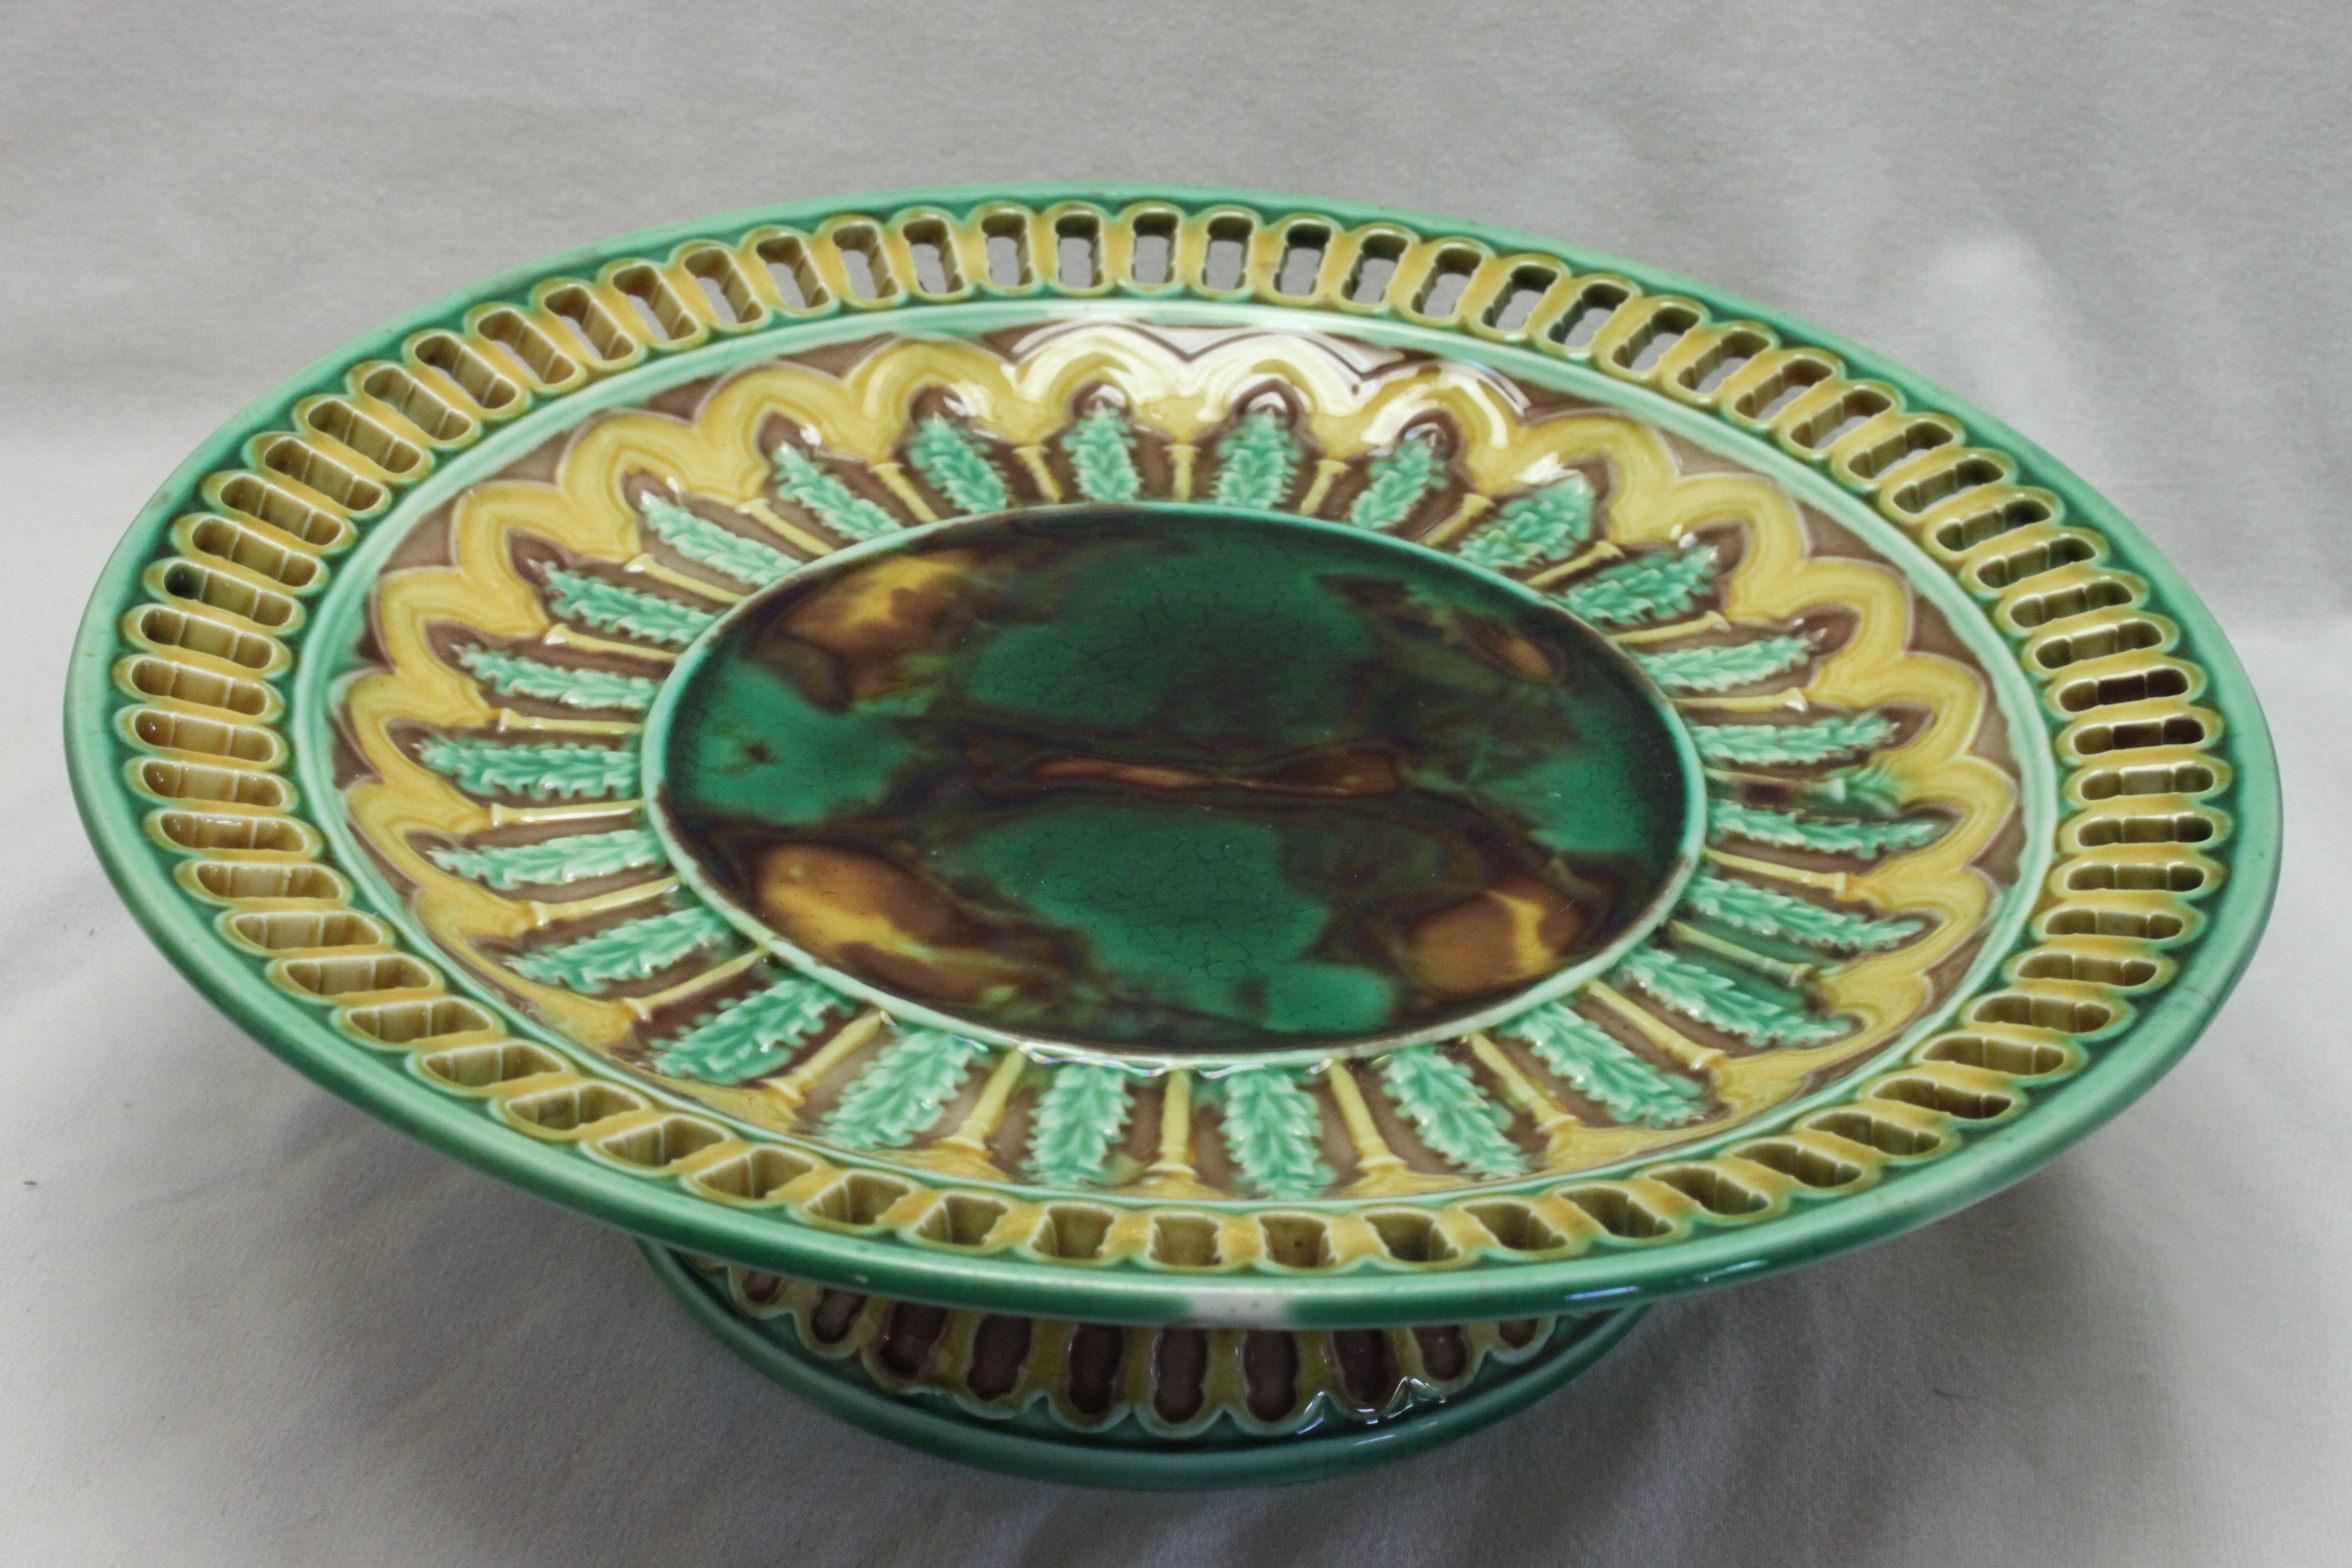 This Wedgwood majolica comport is decorated with green, brown and yellow majolica glazes around a central panel of mottled glazes. The reticulated rim is echoed in the blind moulding to the foot. The diameter is 210 mm (8.25 inches) and it stands 64